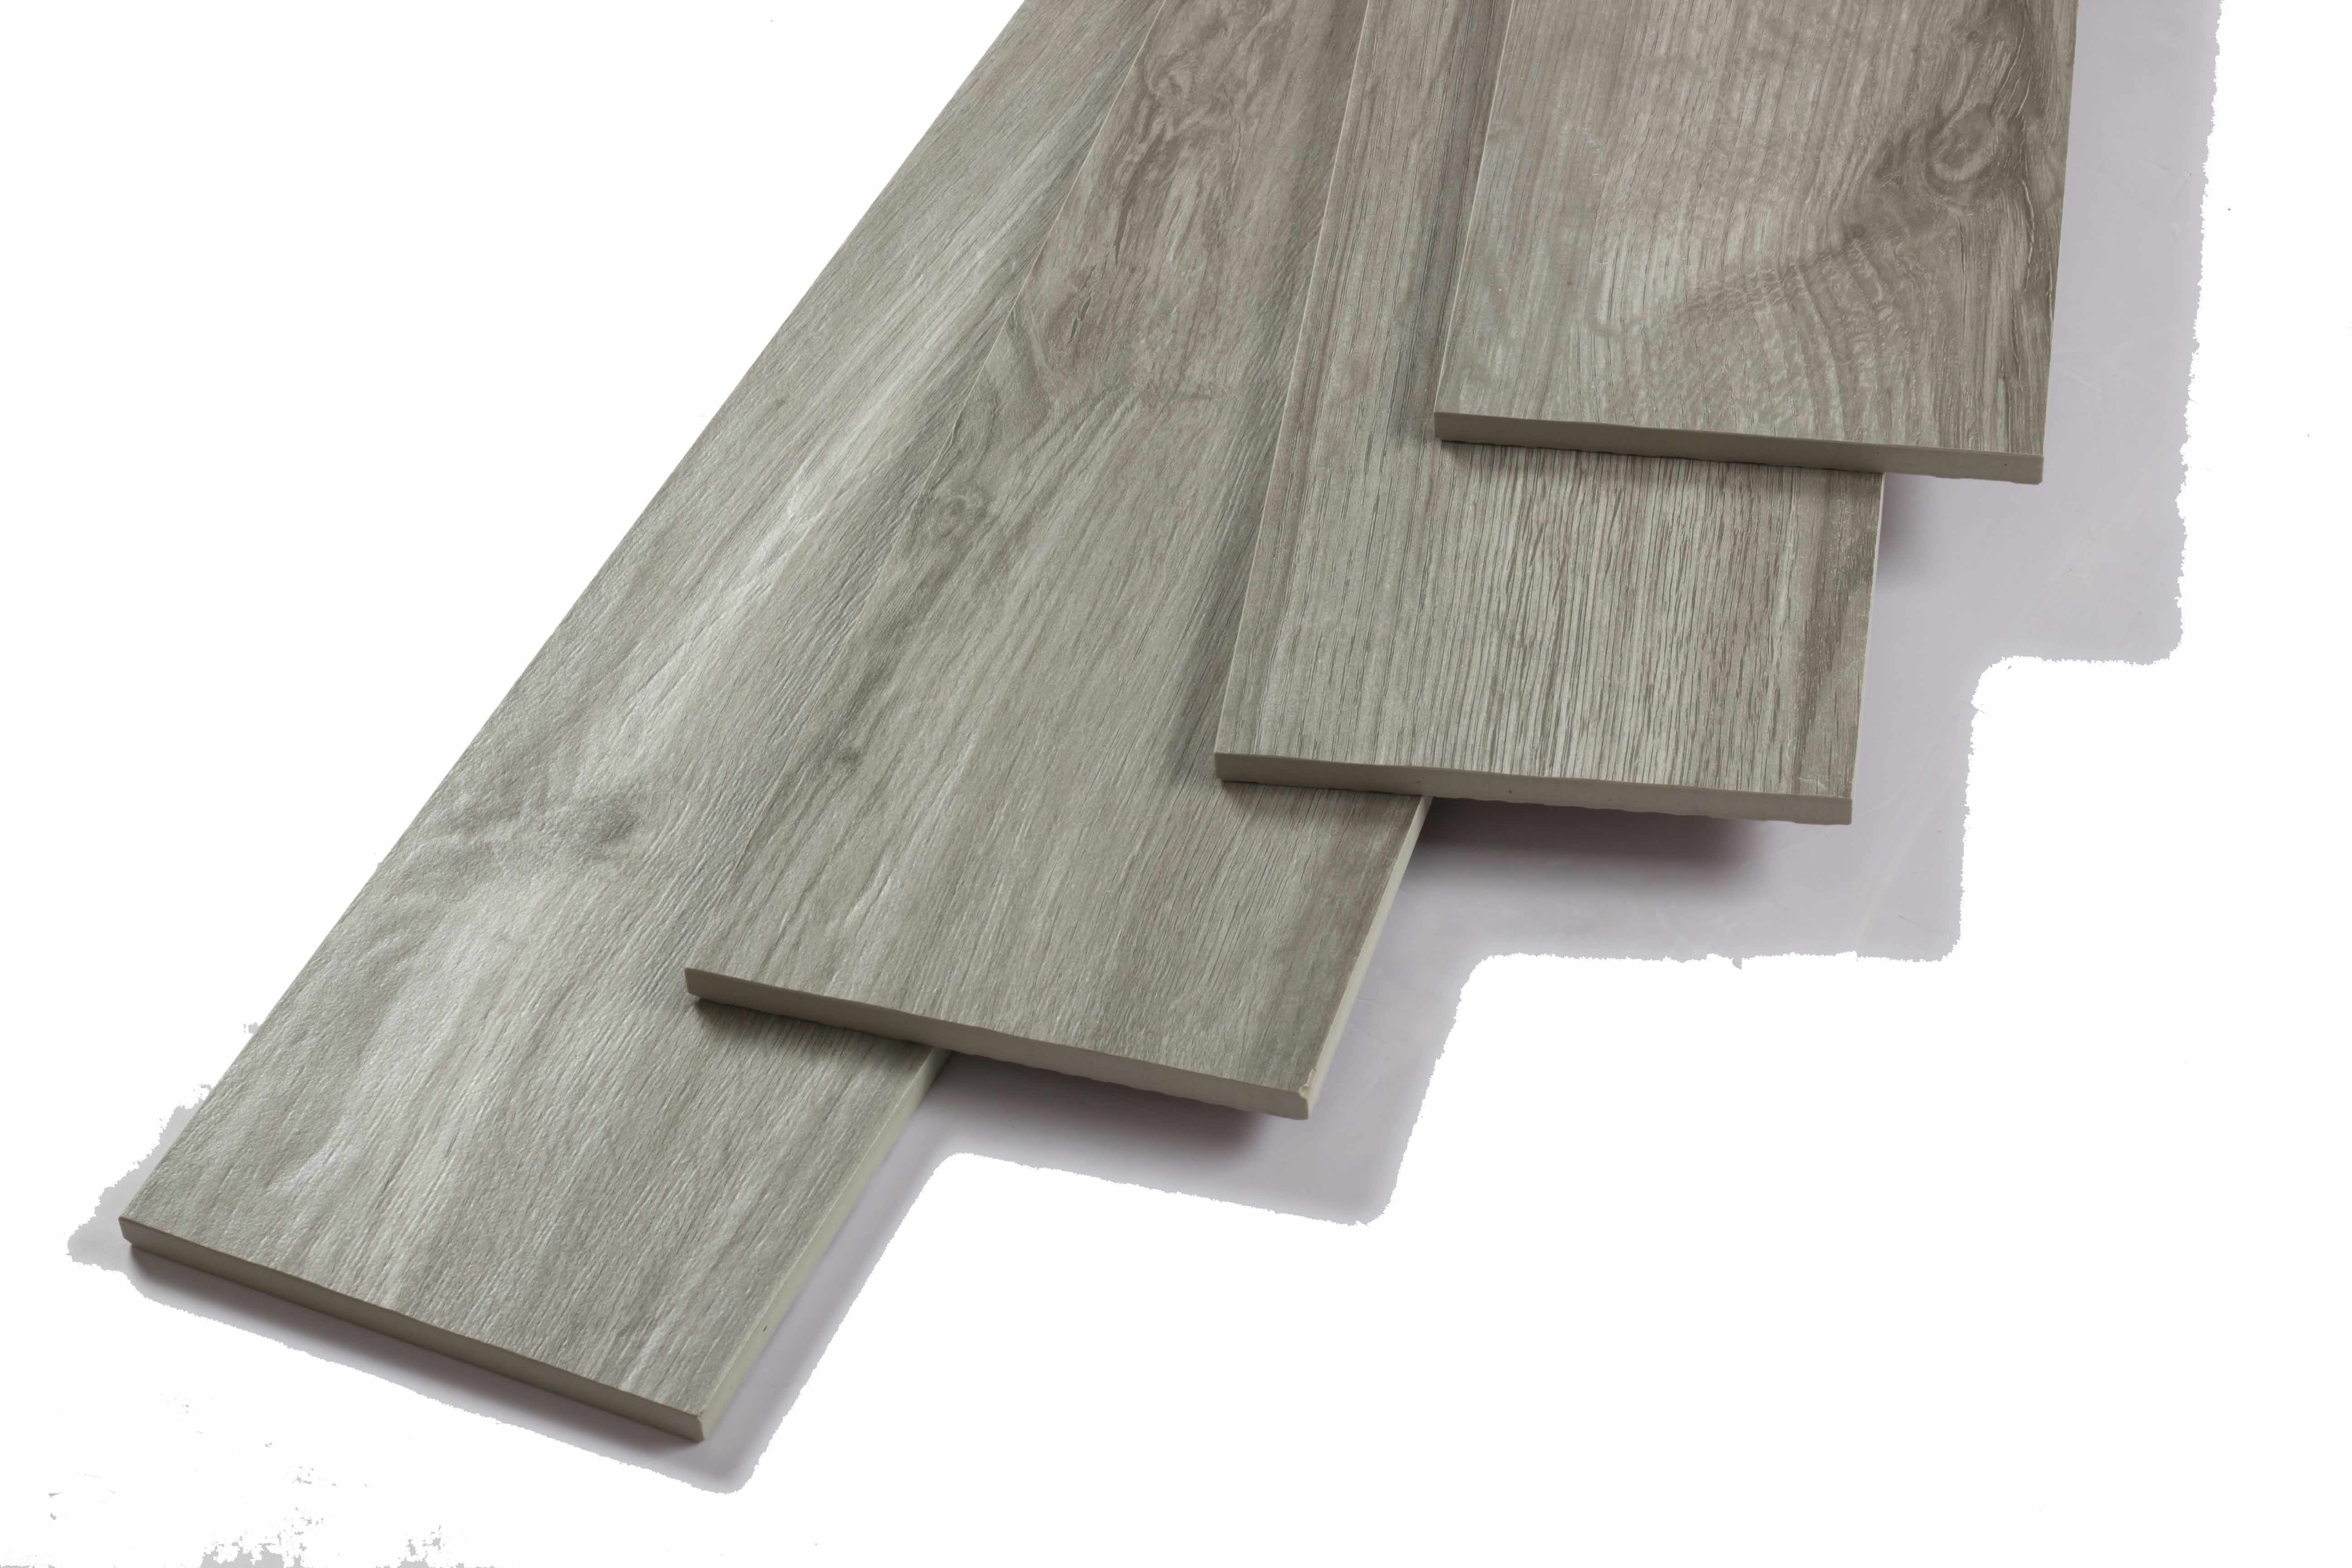 Quality Light Gray 150x900mm Rectified Wood Porcelain Tile wholesale